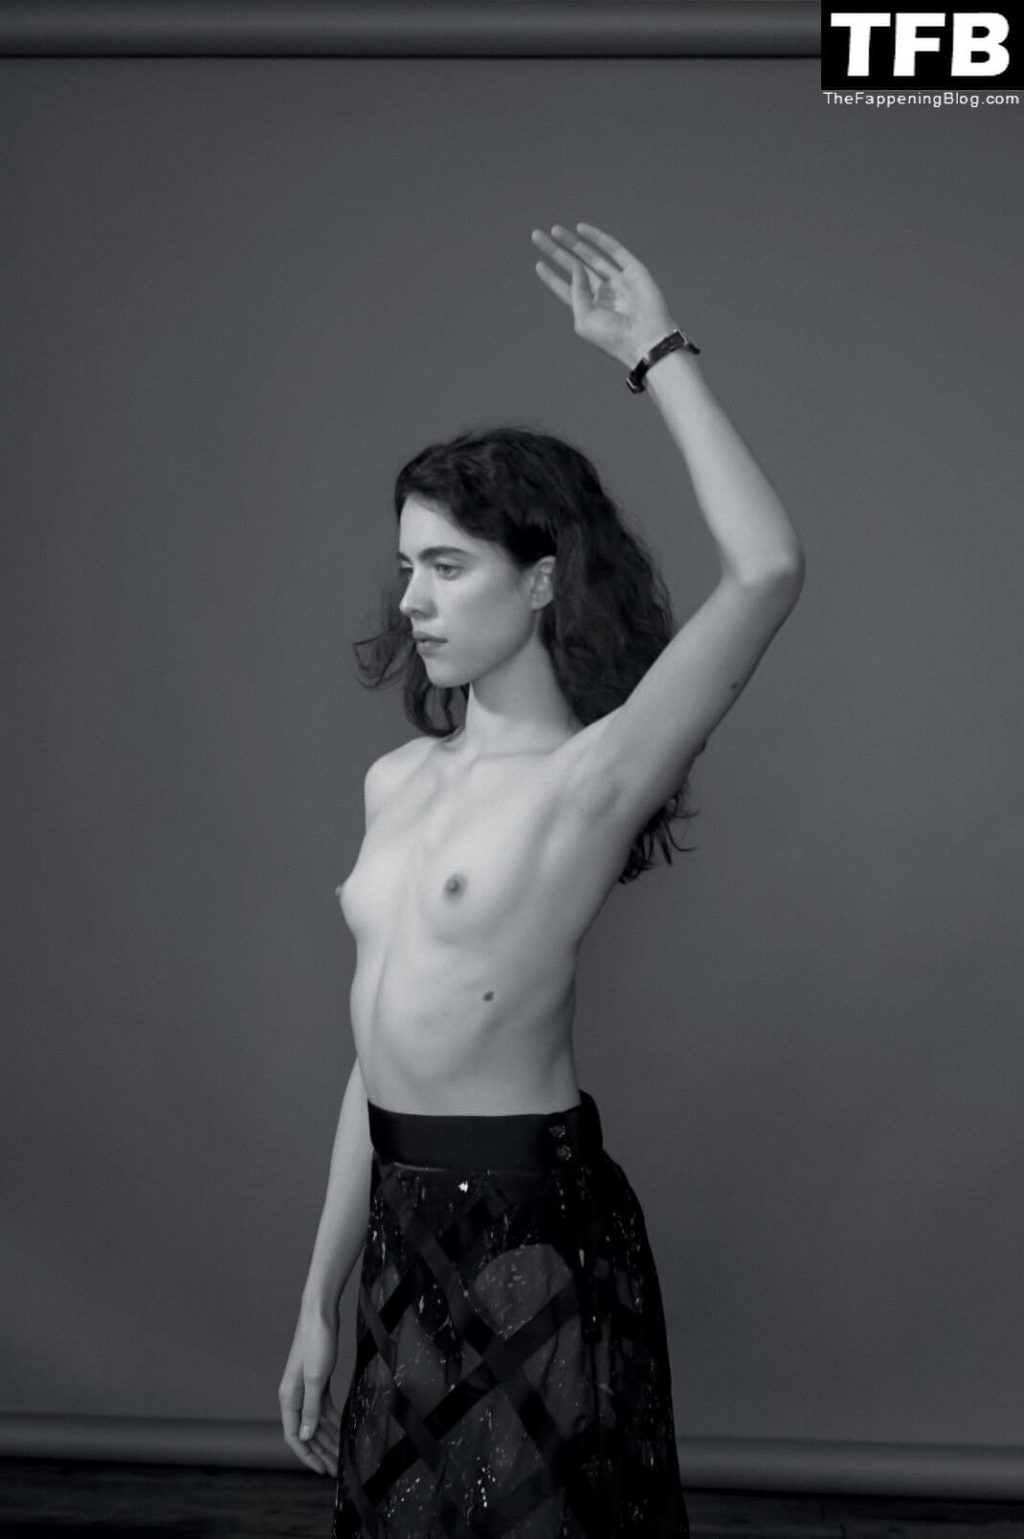 Margaret Qualley Nude – AnOther Magazine (6 Photos)